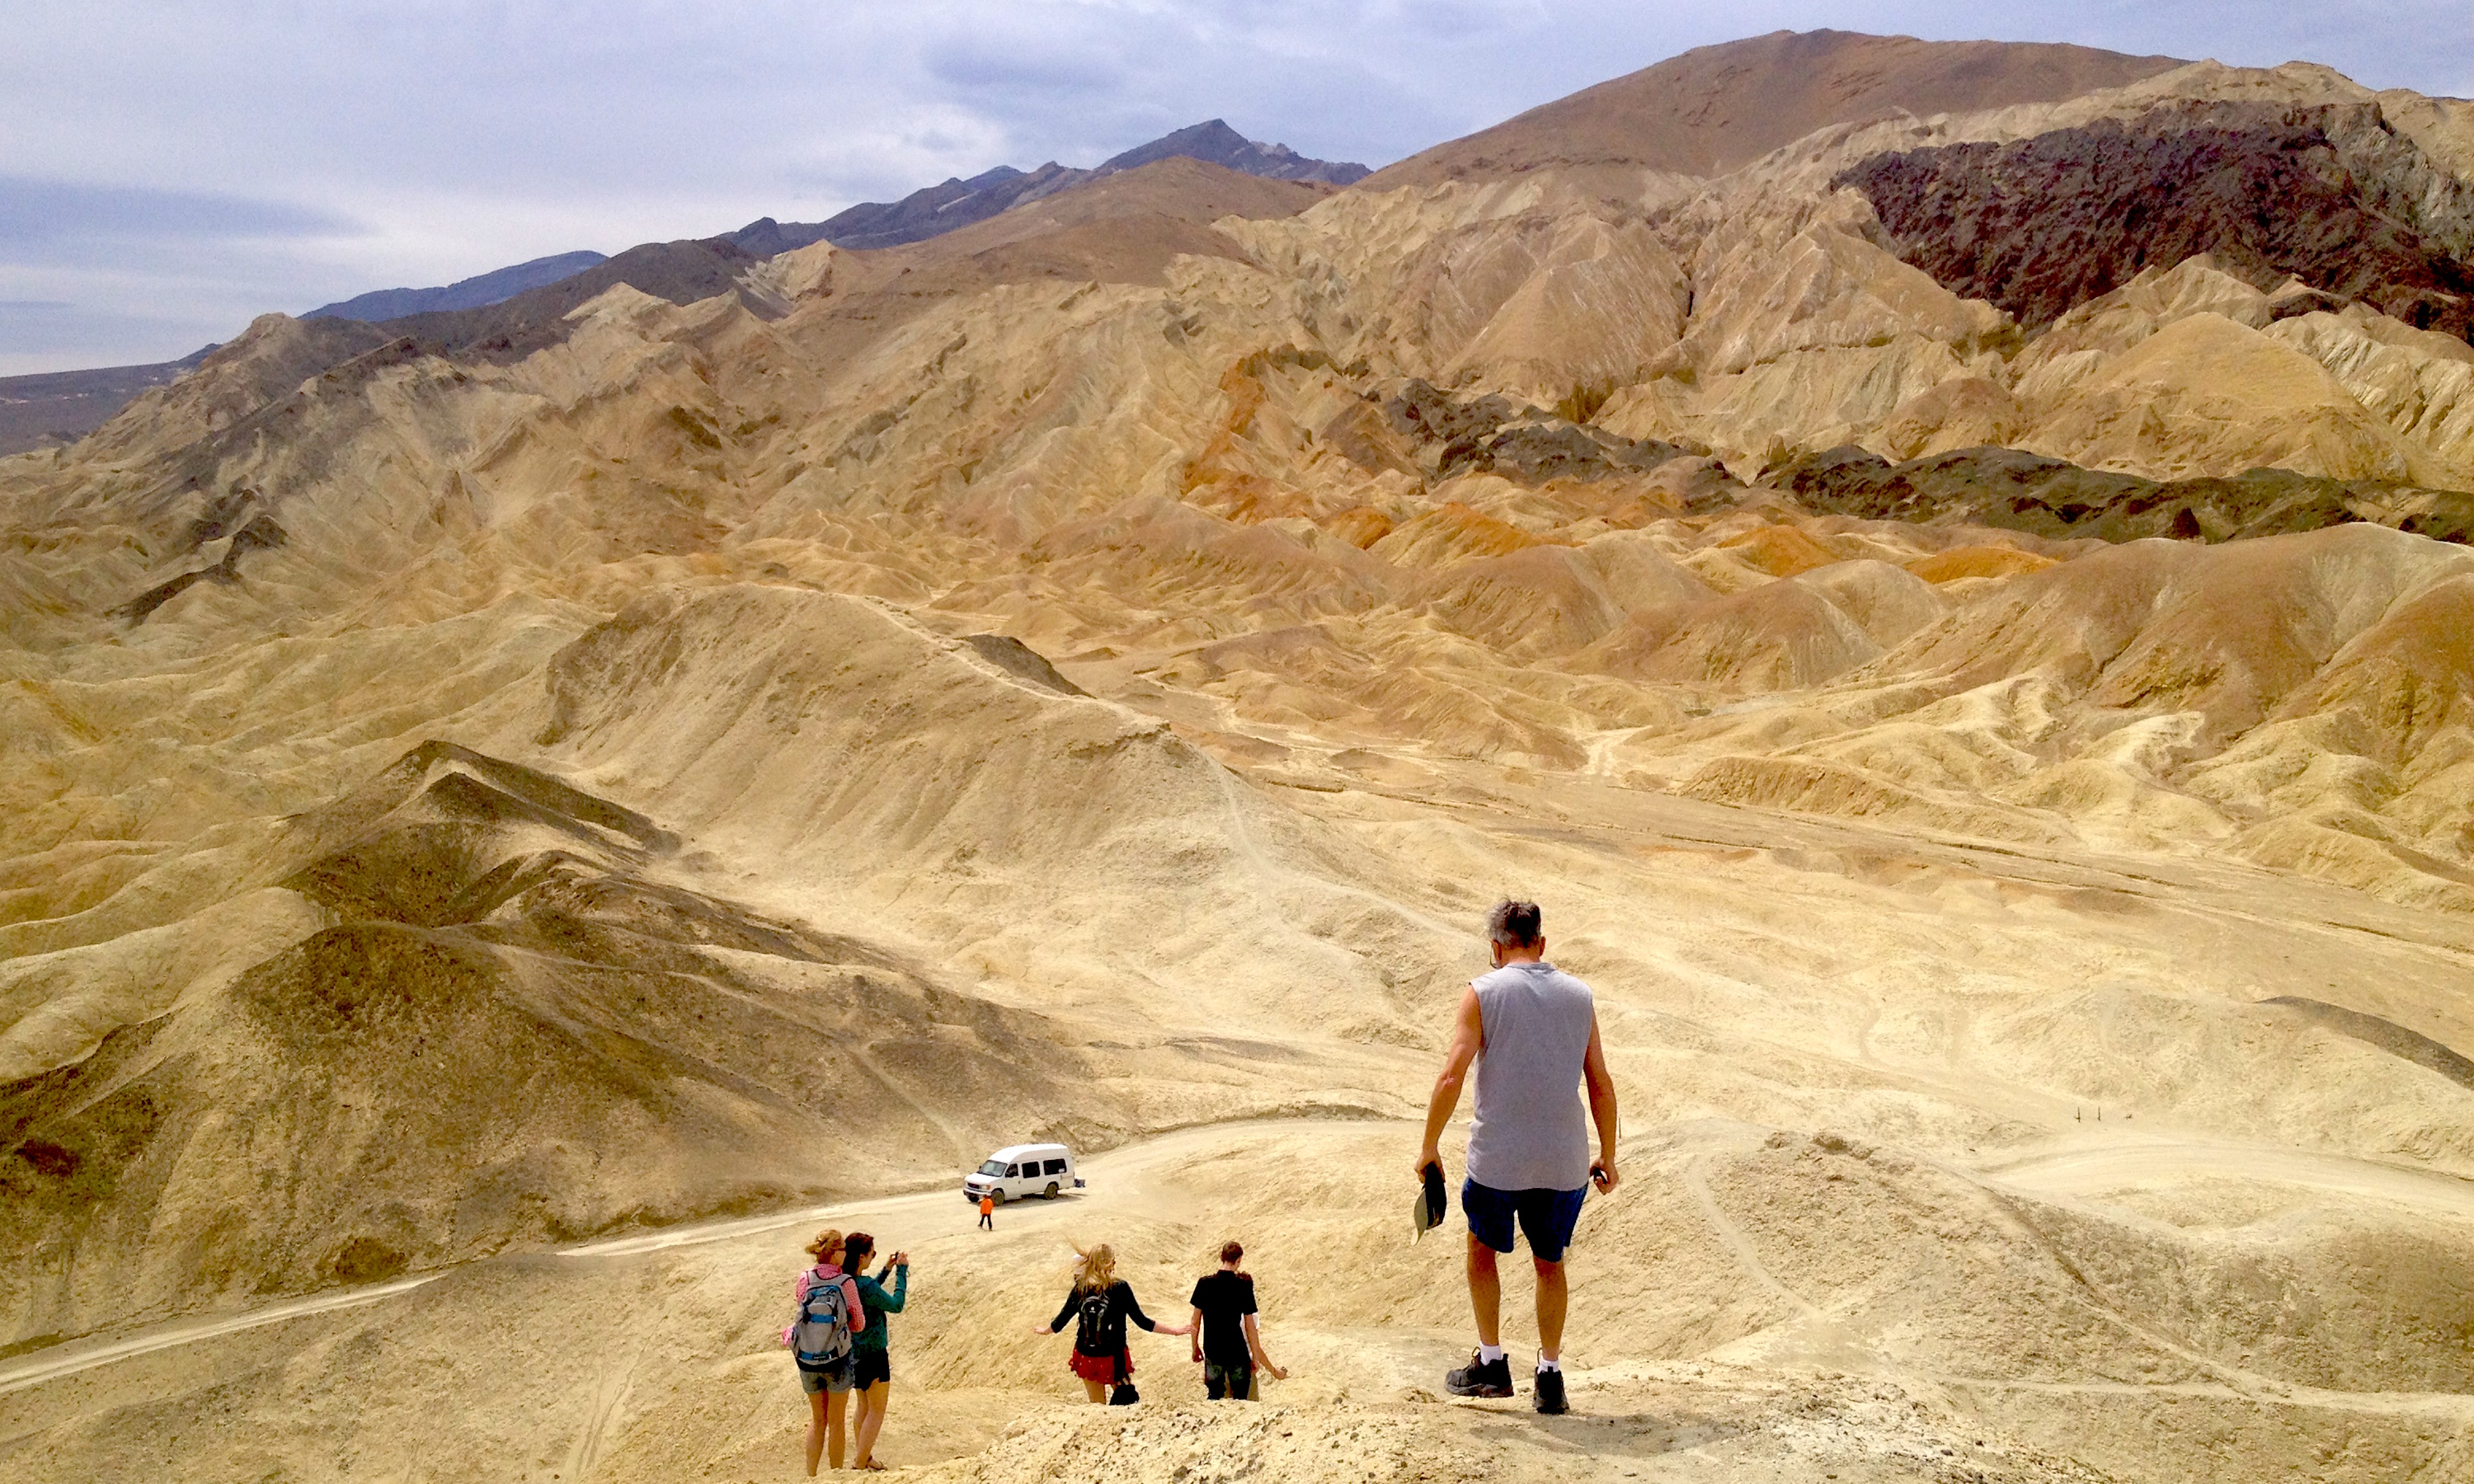 4-Day National Parks Camping Tour from Las Vegas: Death Valley National Park and Yosemite National Park | 14 Pax Small Group | Park Entries Included | Multi-language